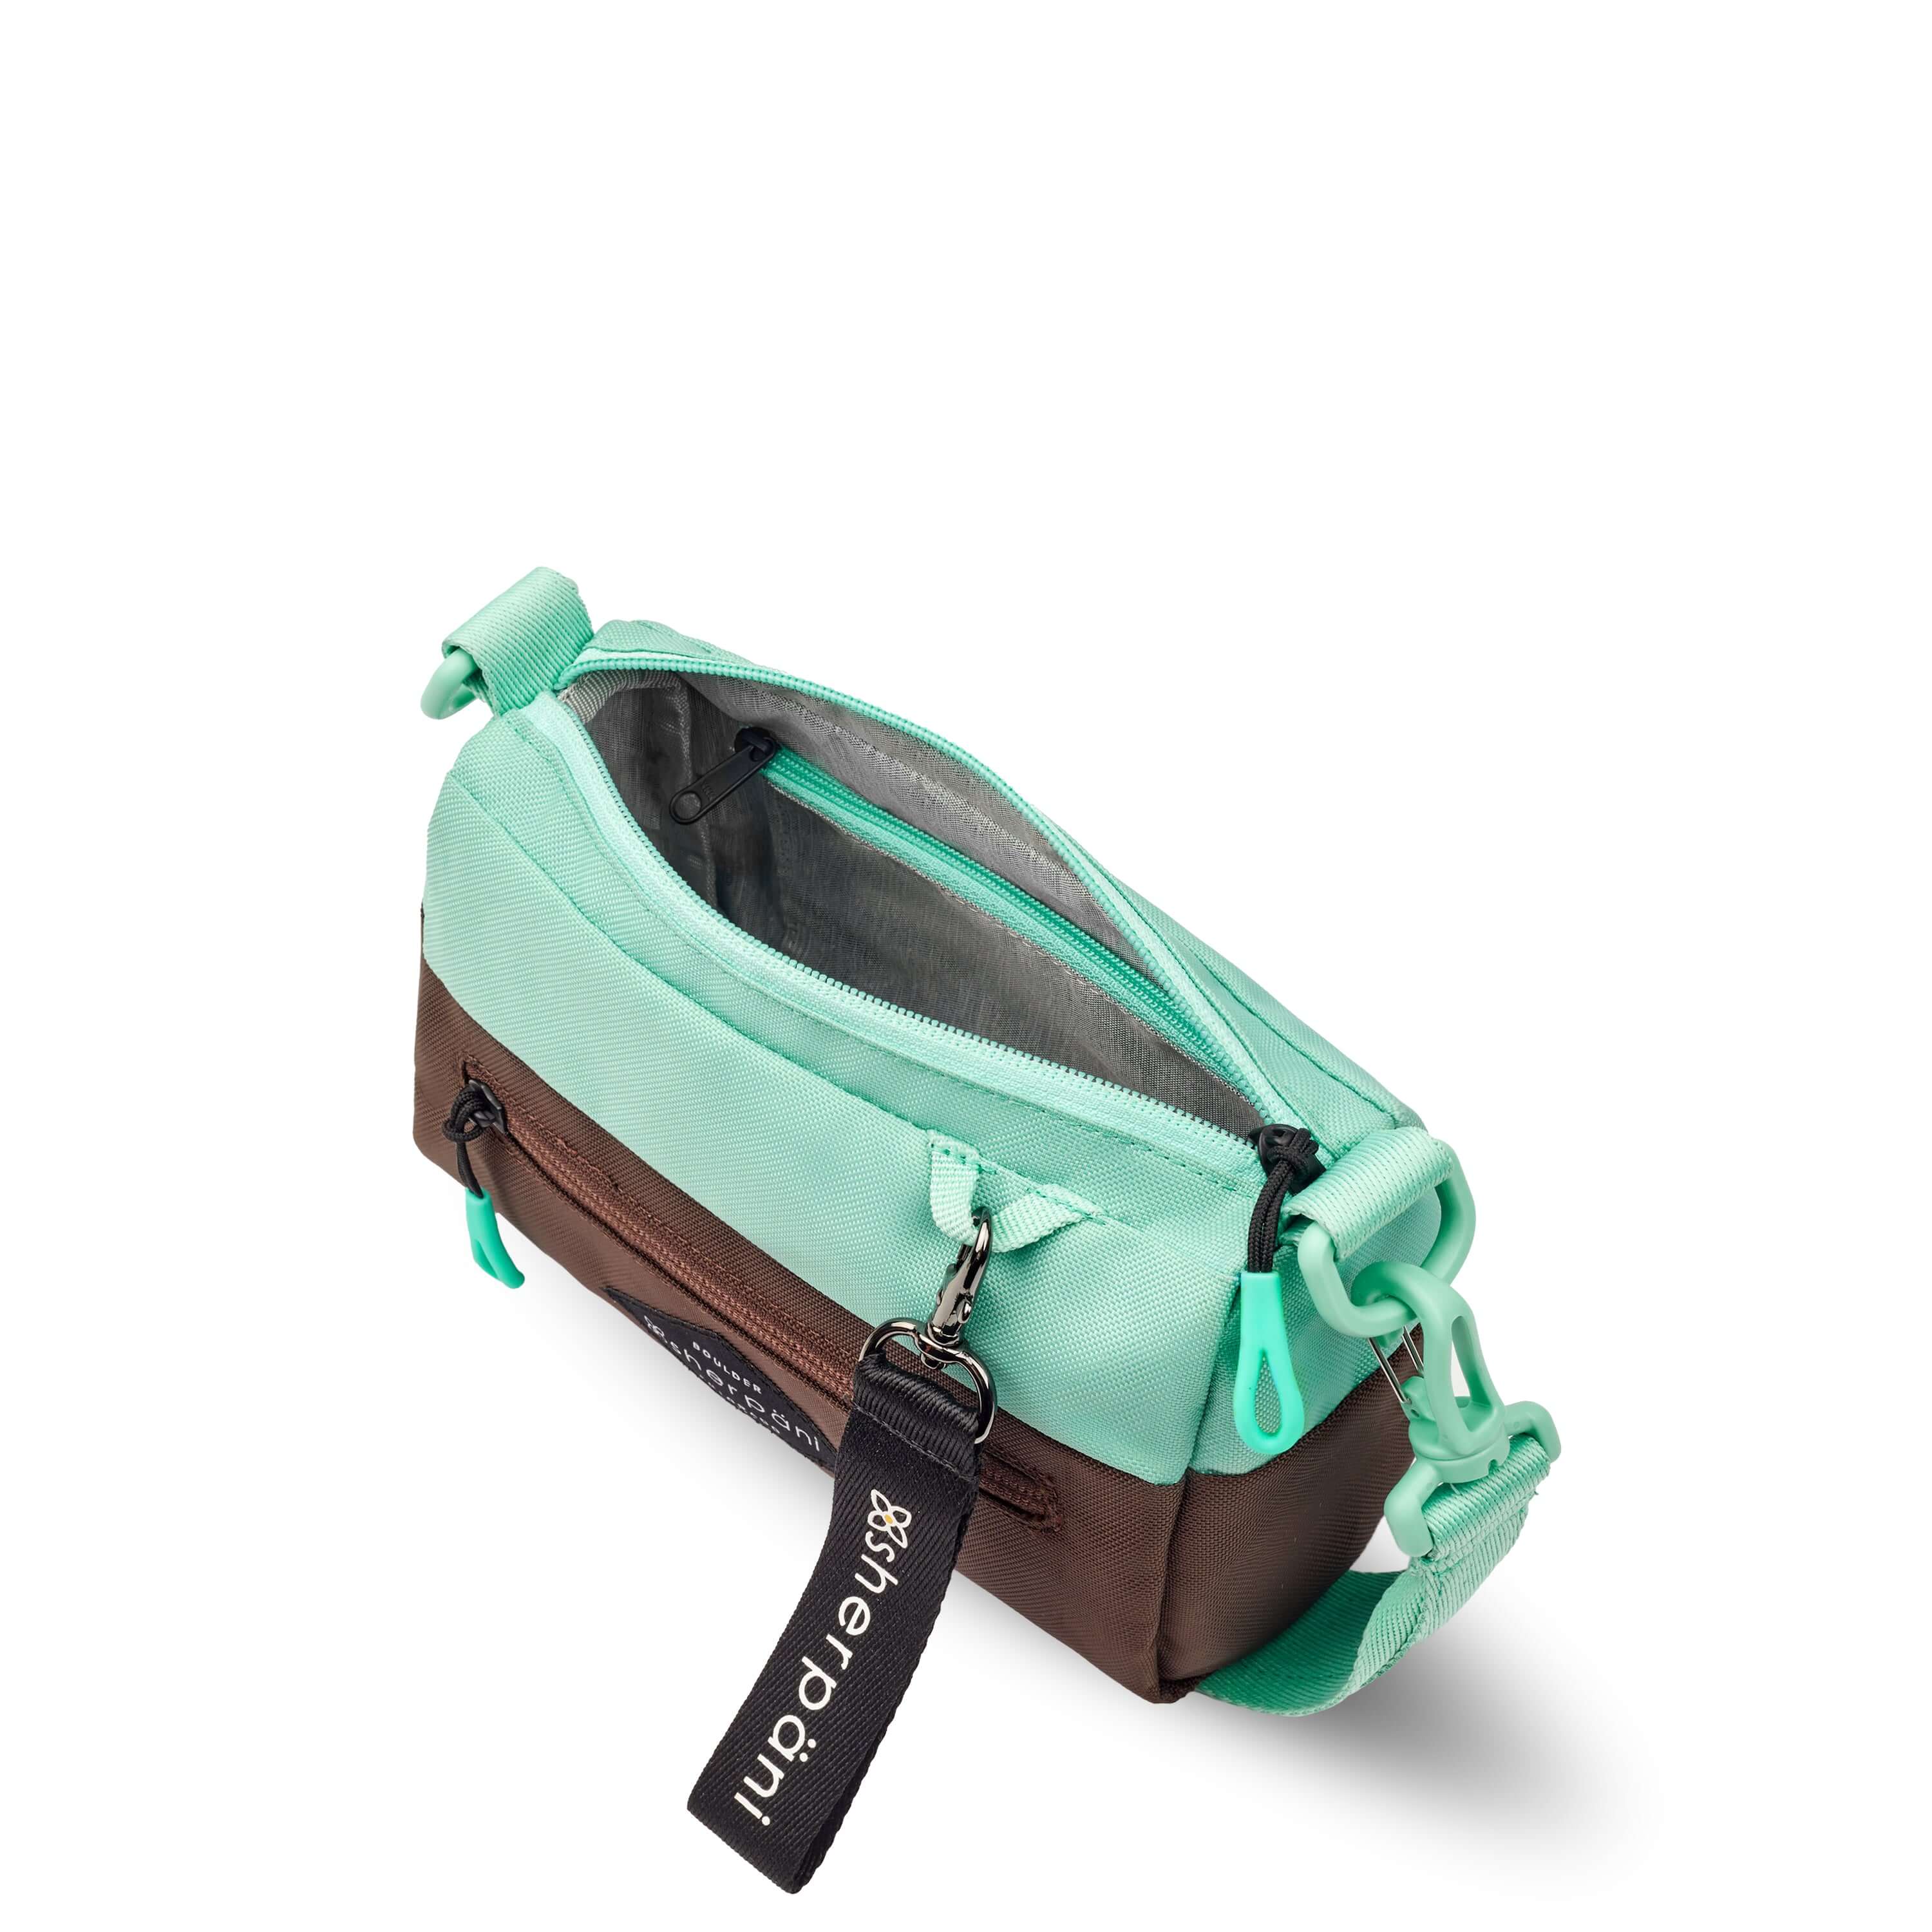 Top view of Sherpani's purse, the Skye in Seagreen. The main zipper compartment is open to reveal a light gray interior and an internal zipper pocket. 